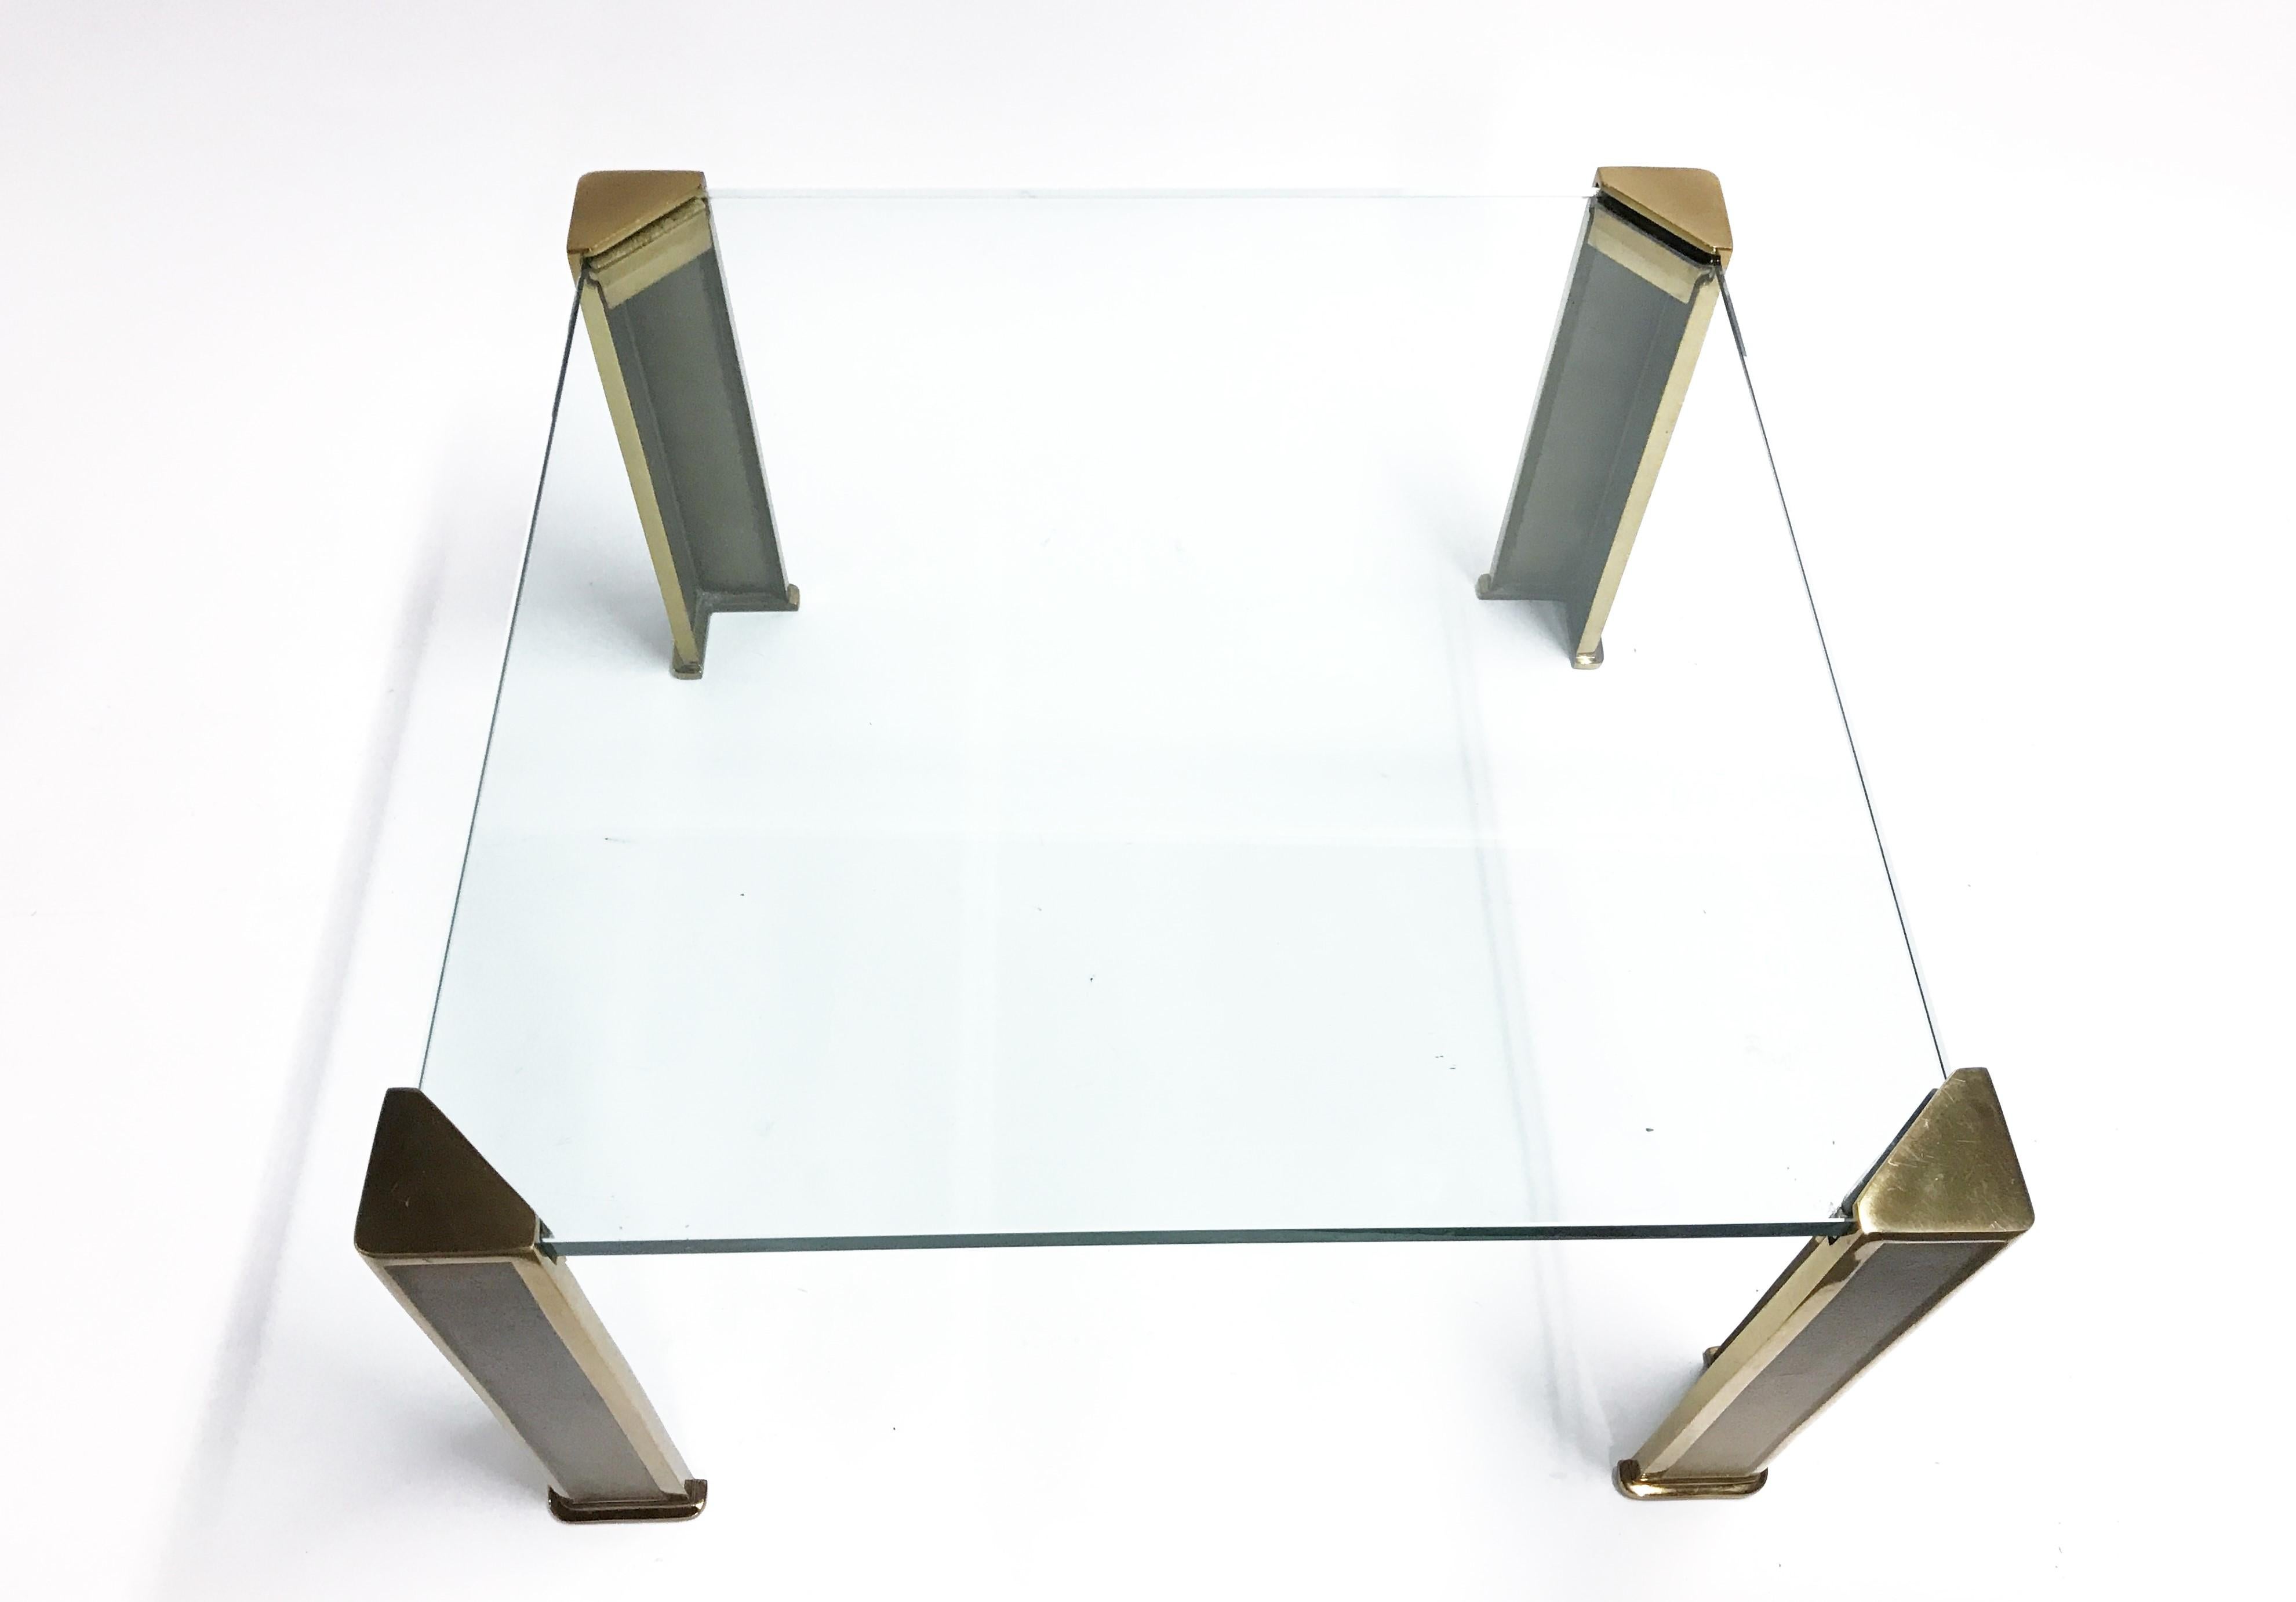 Square glass coffee table with cast bronze legs design by Peter Ghyczy.

The thick glass top is supported in the corners by the heavy bronze legs so it looks to be floating.

Thick 15 mm clear glass tabletop.

1970s, Germany

Measures: